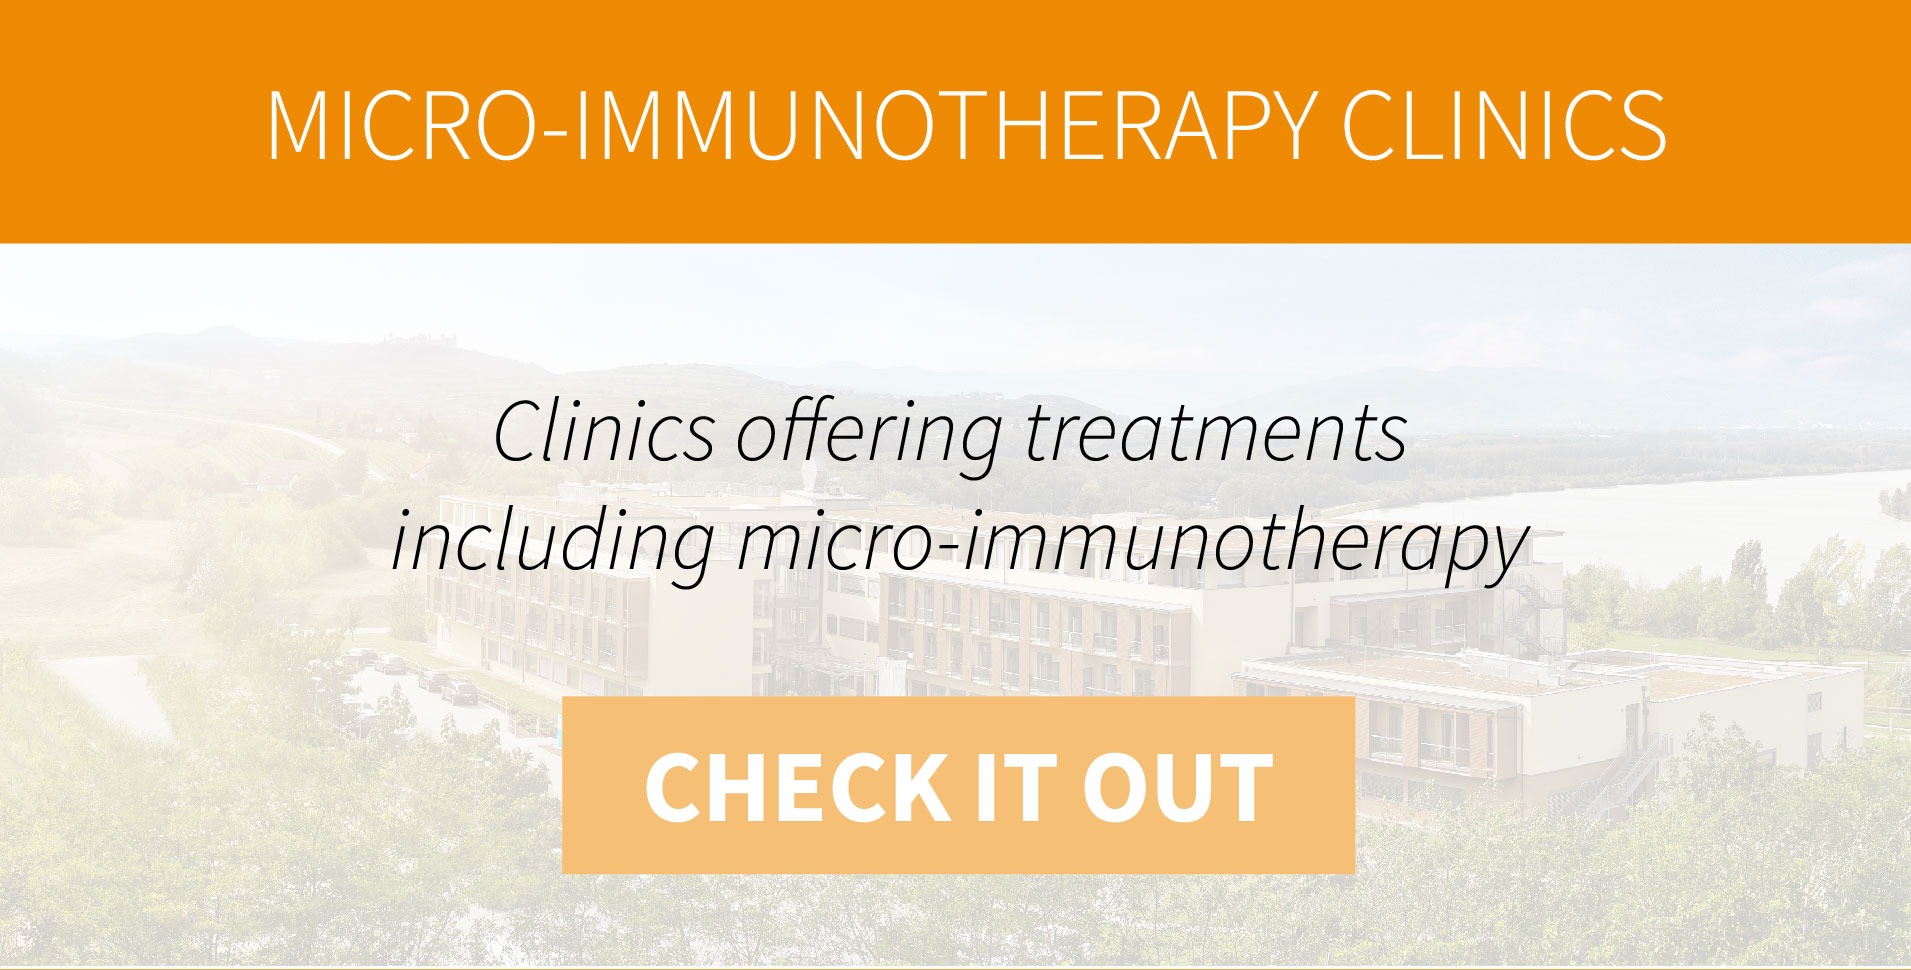 Clinics offering micro-immunotherapy treatments